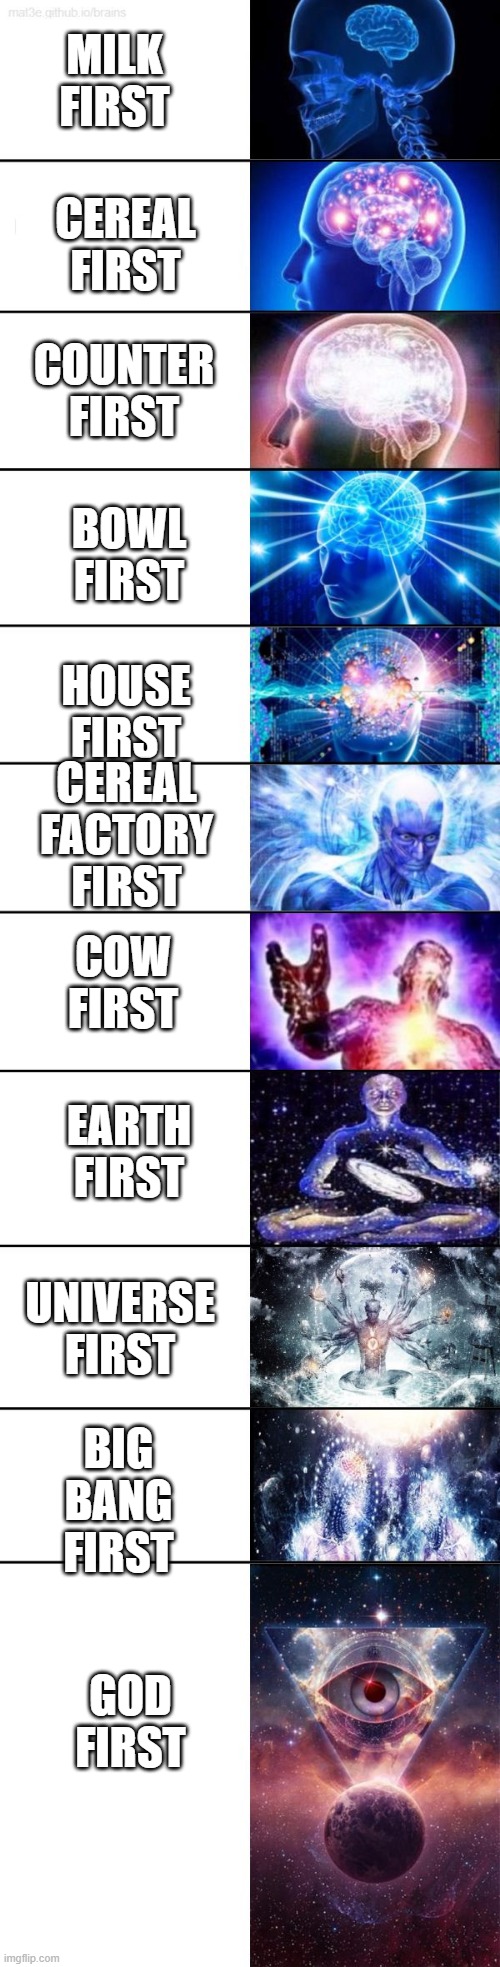 Idk if this is funny | CEREAL FIRST; MILK FIRST; COUNTER FIRST; BOWL FIRST; CEREAL FACTORY FIRST; HOUSE FIRST; COW FIRST; EARTH FIRST; UNIVERSE FIRST; BIG BANG FIRST; GOD FIRST | image tagged in extended expanding brain | made w/ Imgflip meme maker